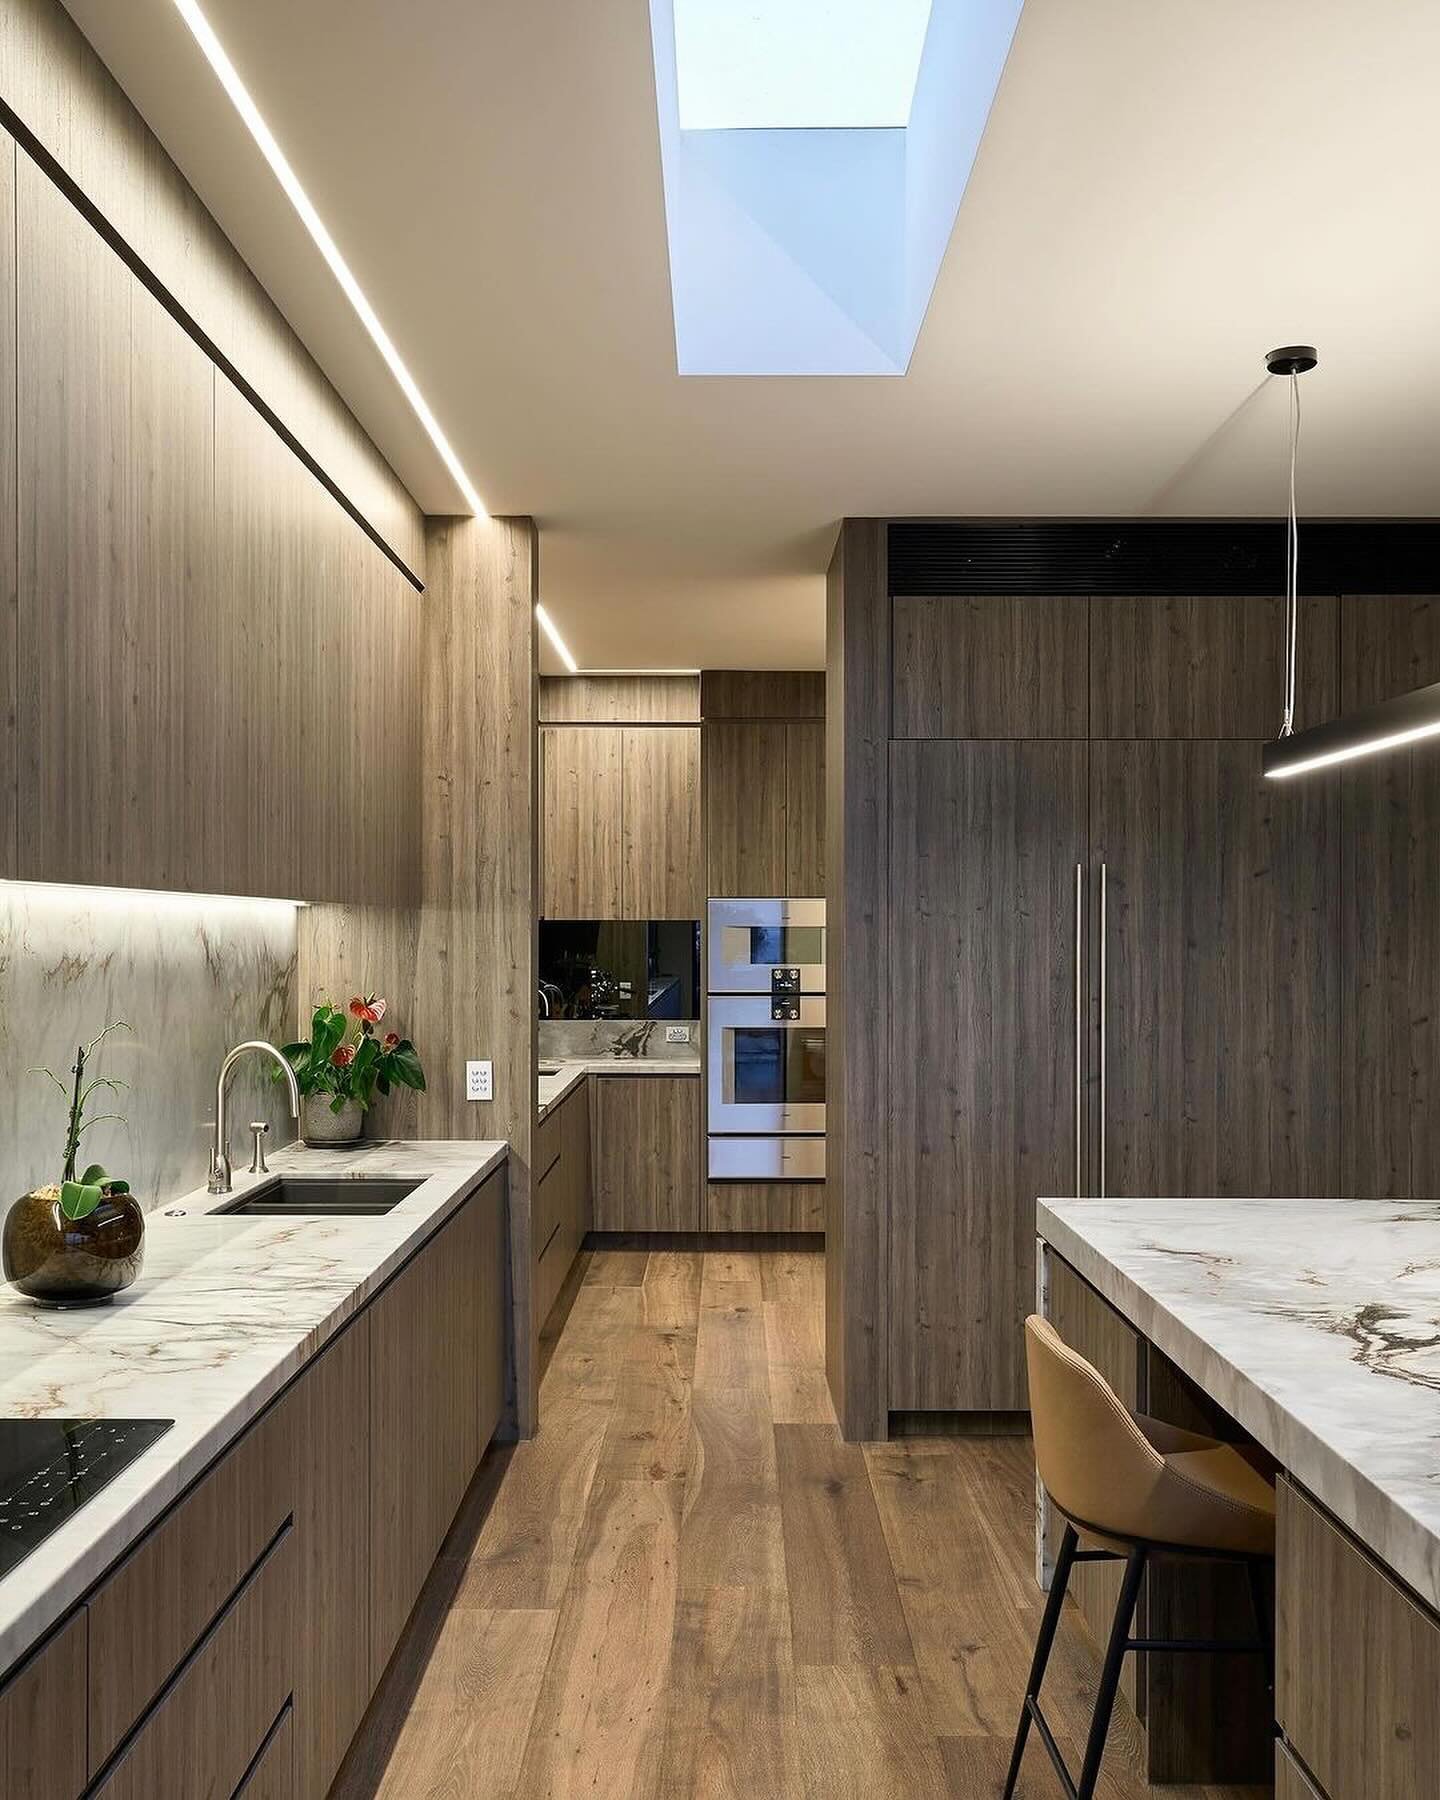 A standard lighting plan will give you a grid pattern full of downlights across your kitchen ceiling - but I know everyone&rsquo;s home lighting needs are different and believe there&rsquo;s no one-size-fits-all.

I much prefer to design lighting to 